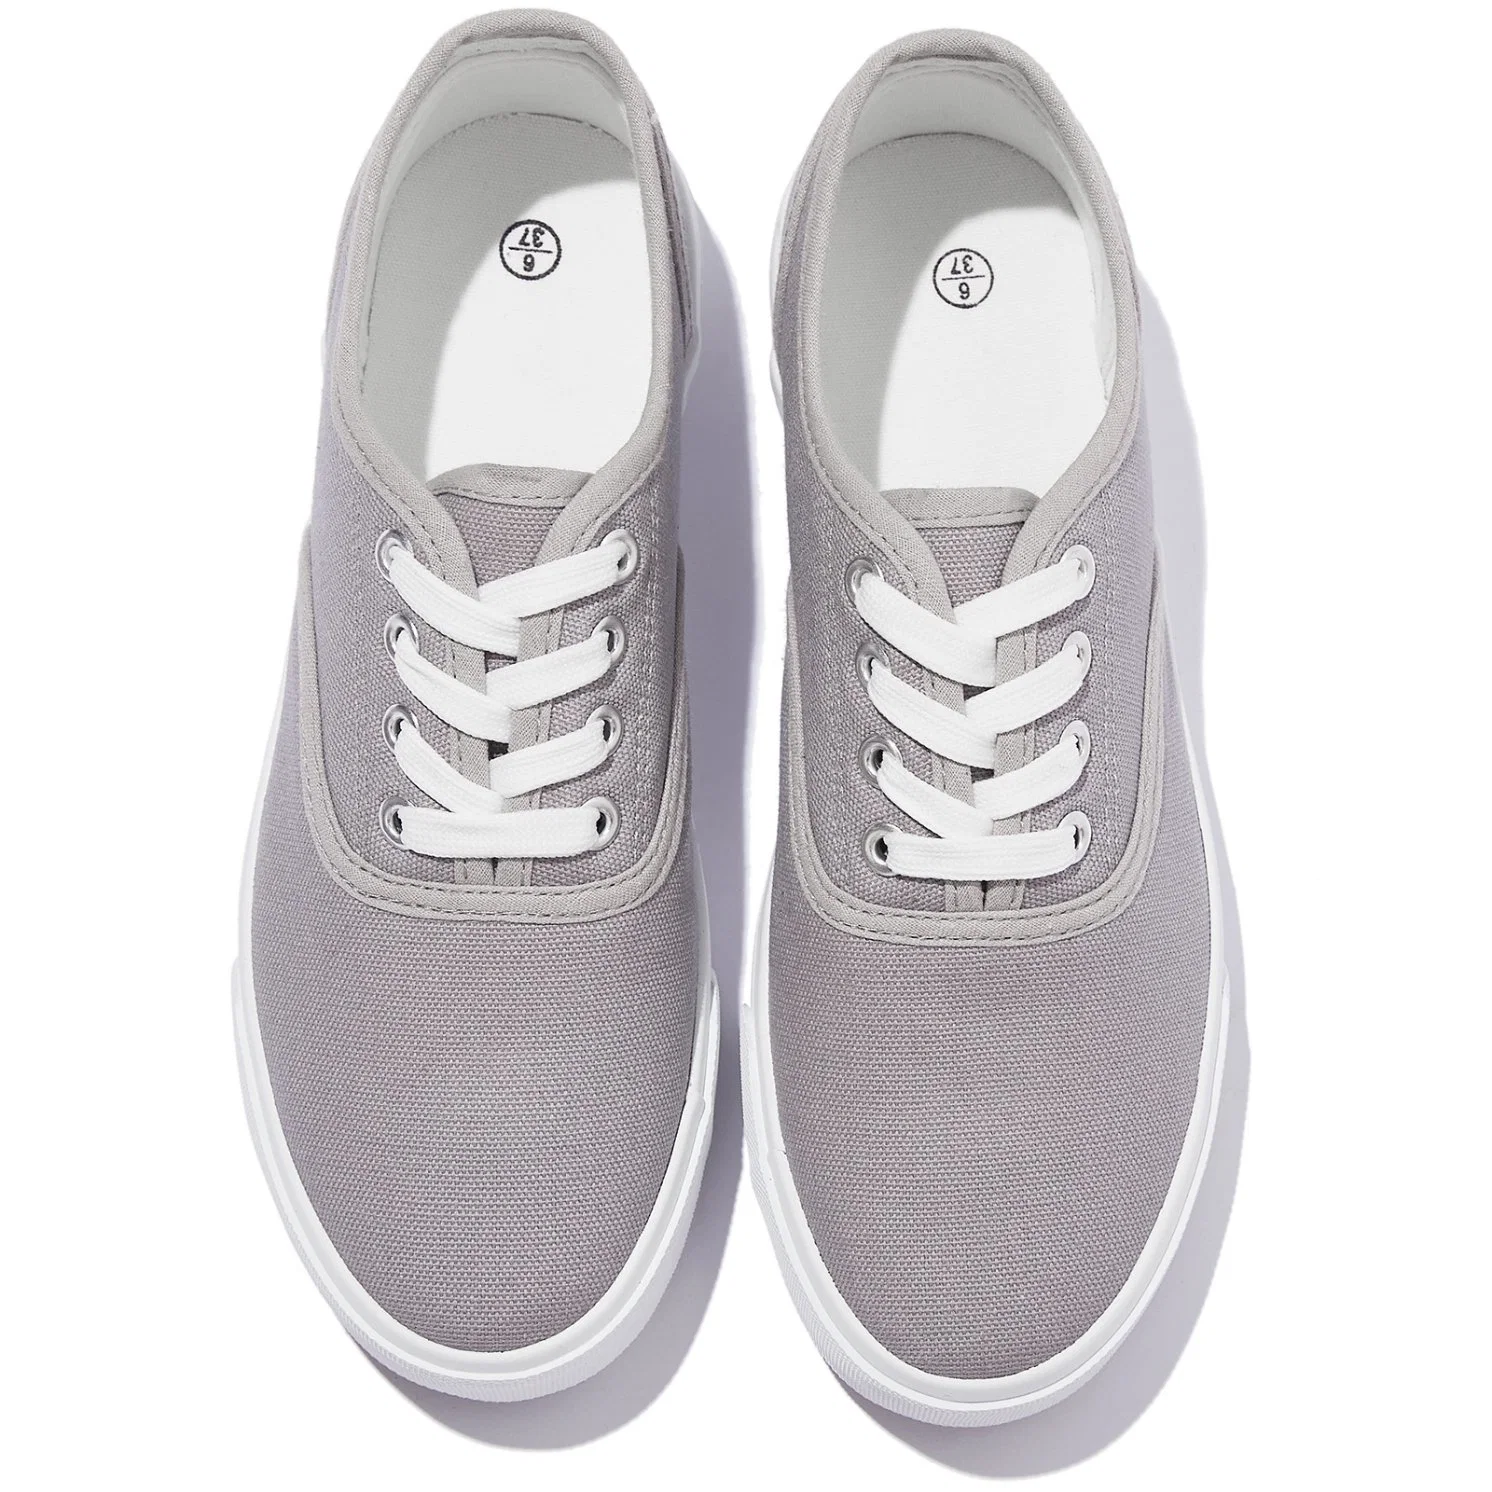 Grey Outdoor Walking Casual Shoes Casual Fashion Canvas Shoes